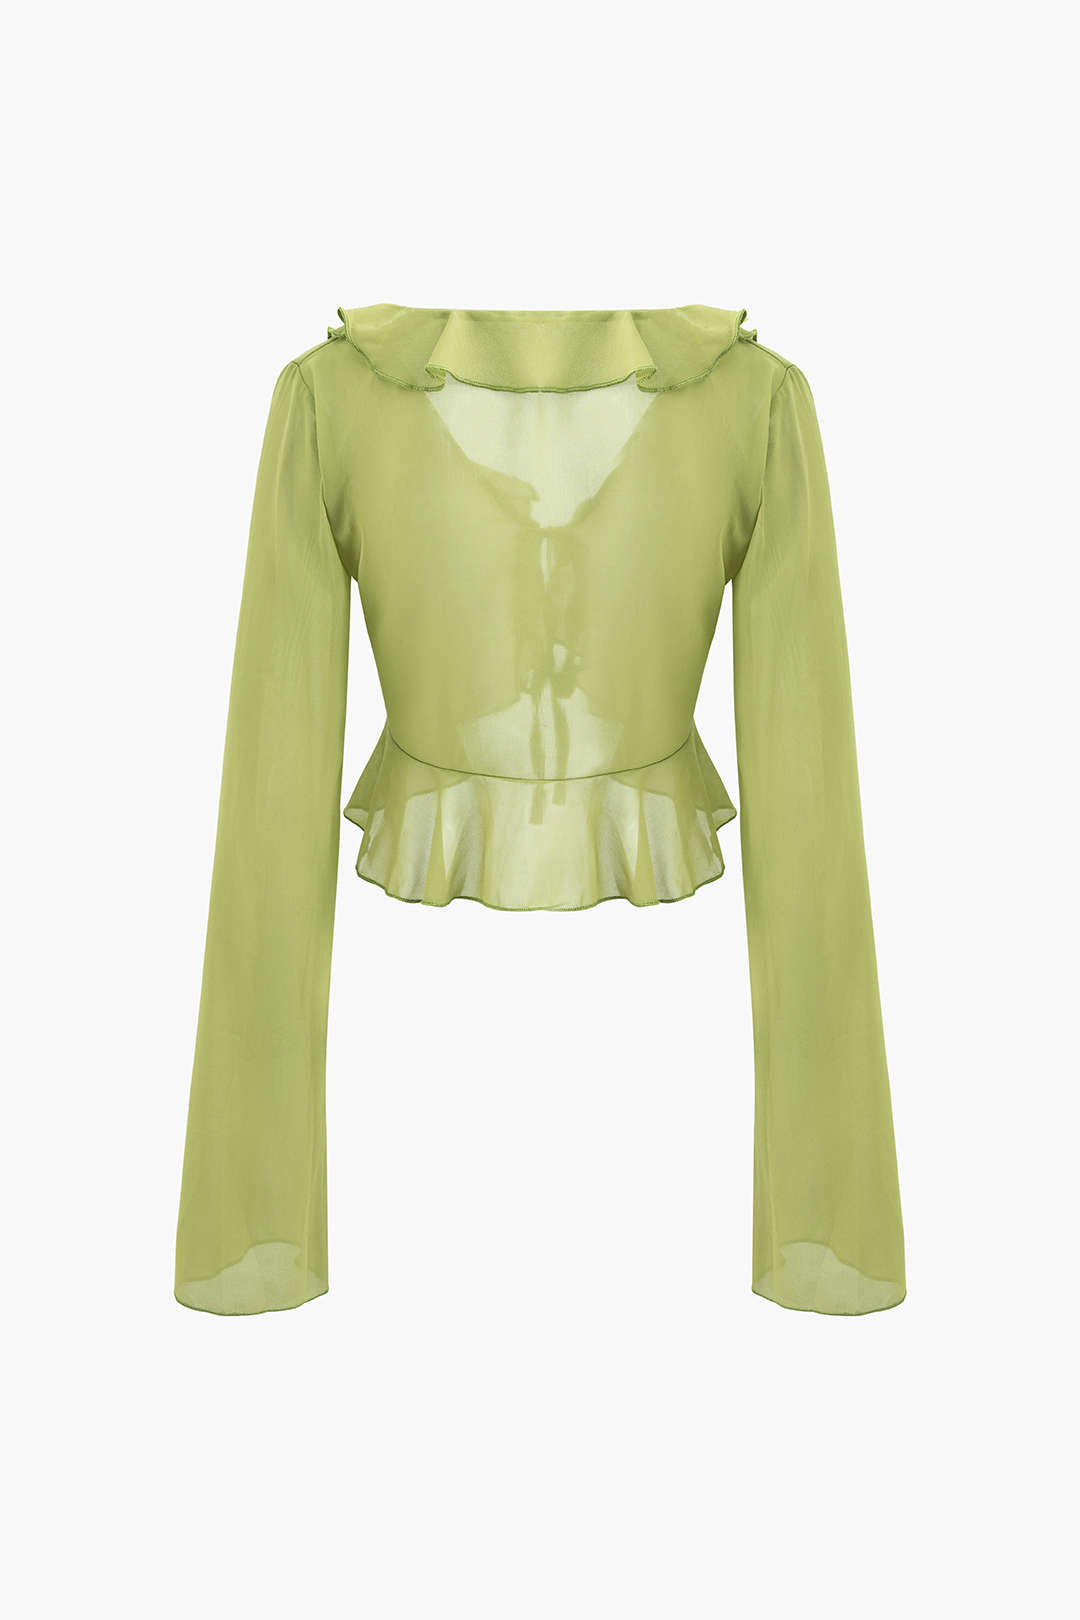 Deep V-neck Ruffle Tie Front Long Sleeve Crop Blouse